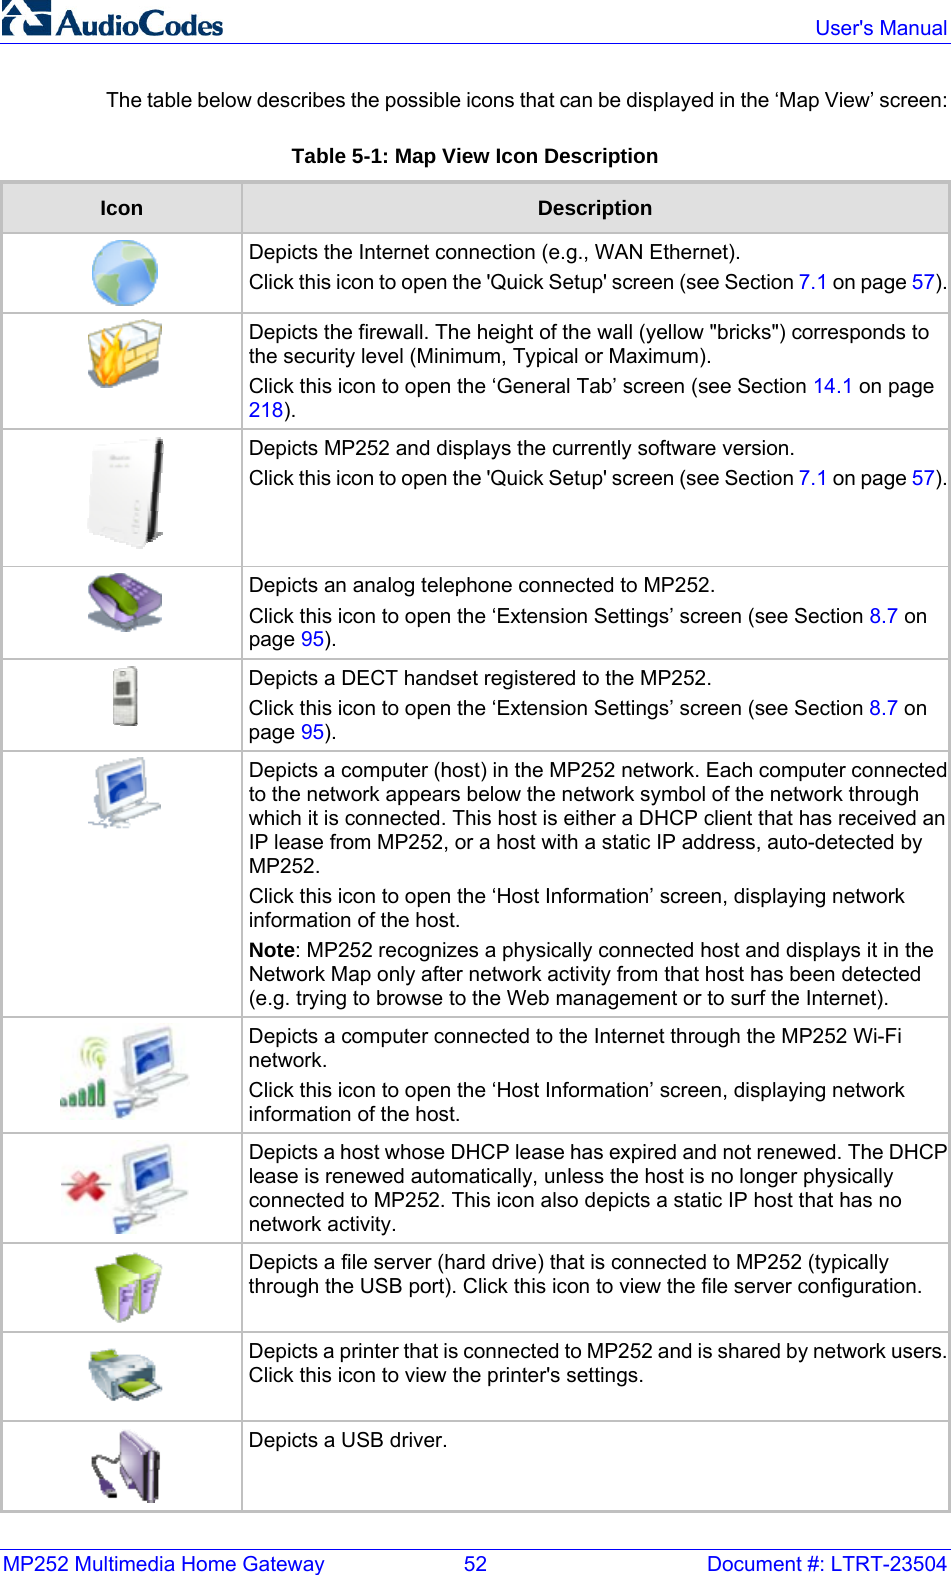 MP252 Multimedia Home Gateway  52  Document #: LTRT-23504  User&apos;s Manual  The table below describes the possible icons that can be displayed in the ‘Map View’ screen: Table 5-1: Map View Icon Description Icon  Description  Depicts the Internet connection (e.g., WAN Ethernet). Click this icon to open the &apos;Quick Setup&apos; screen (see Section 7.1 on page 57). Depicts the firewall. The height of the wall (yellow &quot;bricks&quot;) corresponds to the security level (Minimum, Typical or Maximum). Click this icon to open the ‘General Tab’ screen (see Section 14.1 on page 218).  Depicts MP252 and displays the currently software version. Click this icon to open the &apos;Quick Setup&apos; screen (see Section 7.1 on page 57). Depicts an analog telephone connected to MP252. Click this icon to open the ‘Extension Settings’ screen (see Section 8.7 on page 95).  Depicts a DECT handset registered to the MP252. Click this icon to open the ‘Extension Settings’ screen (see Section 8.7 on page 95).  Depicts a computer (host) in the MP252 network. Each computer connected to the network appears below the network symbol of the network through which it is connected. This host is either a DHCP client that has received an IP lease from MP252, or a host with a static IP address, auto-detected by MP252.  Click this icon to open the ‘Host Information’ screen, displaying network information of the host. Note: MP252 recognizes a physically connected host and displays it in the Network Map only after network activity from that host has been detected (e.g. trying to browse to the Web management or to surf the Internet).   Depicts a computer connected to the Internet through the MP252 Wi-Fi network.  Click this icon to open the ‘Host Information’ screen, displaying network information of the host.  Depicts a host whose DHCP lease has expired and not renewed. The DHCP lease is renewed automatically, unless the host is no longer physically connected to MP252. This icon also depicts a static IP host that has no network activity.  Depicts a file server (hard drive) that is connected to MP252 (typically through the USB port). Click this icon to view the file server configuration.  Depicts a printer that is connected to MP252 and is shared by network users. Click this icon to view the printer&apos;s settings.  Depicts a USB driver. 